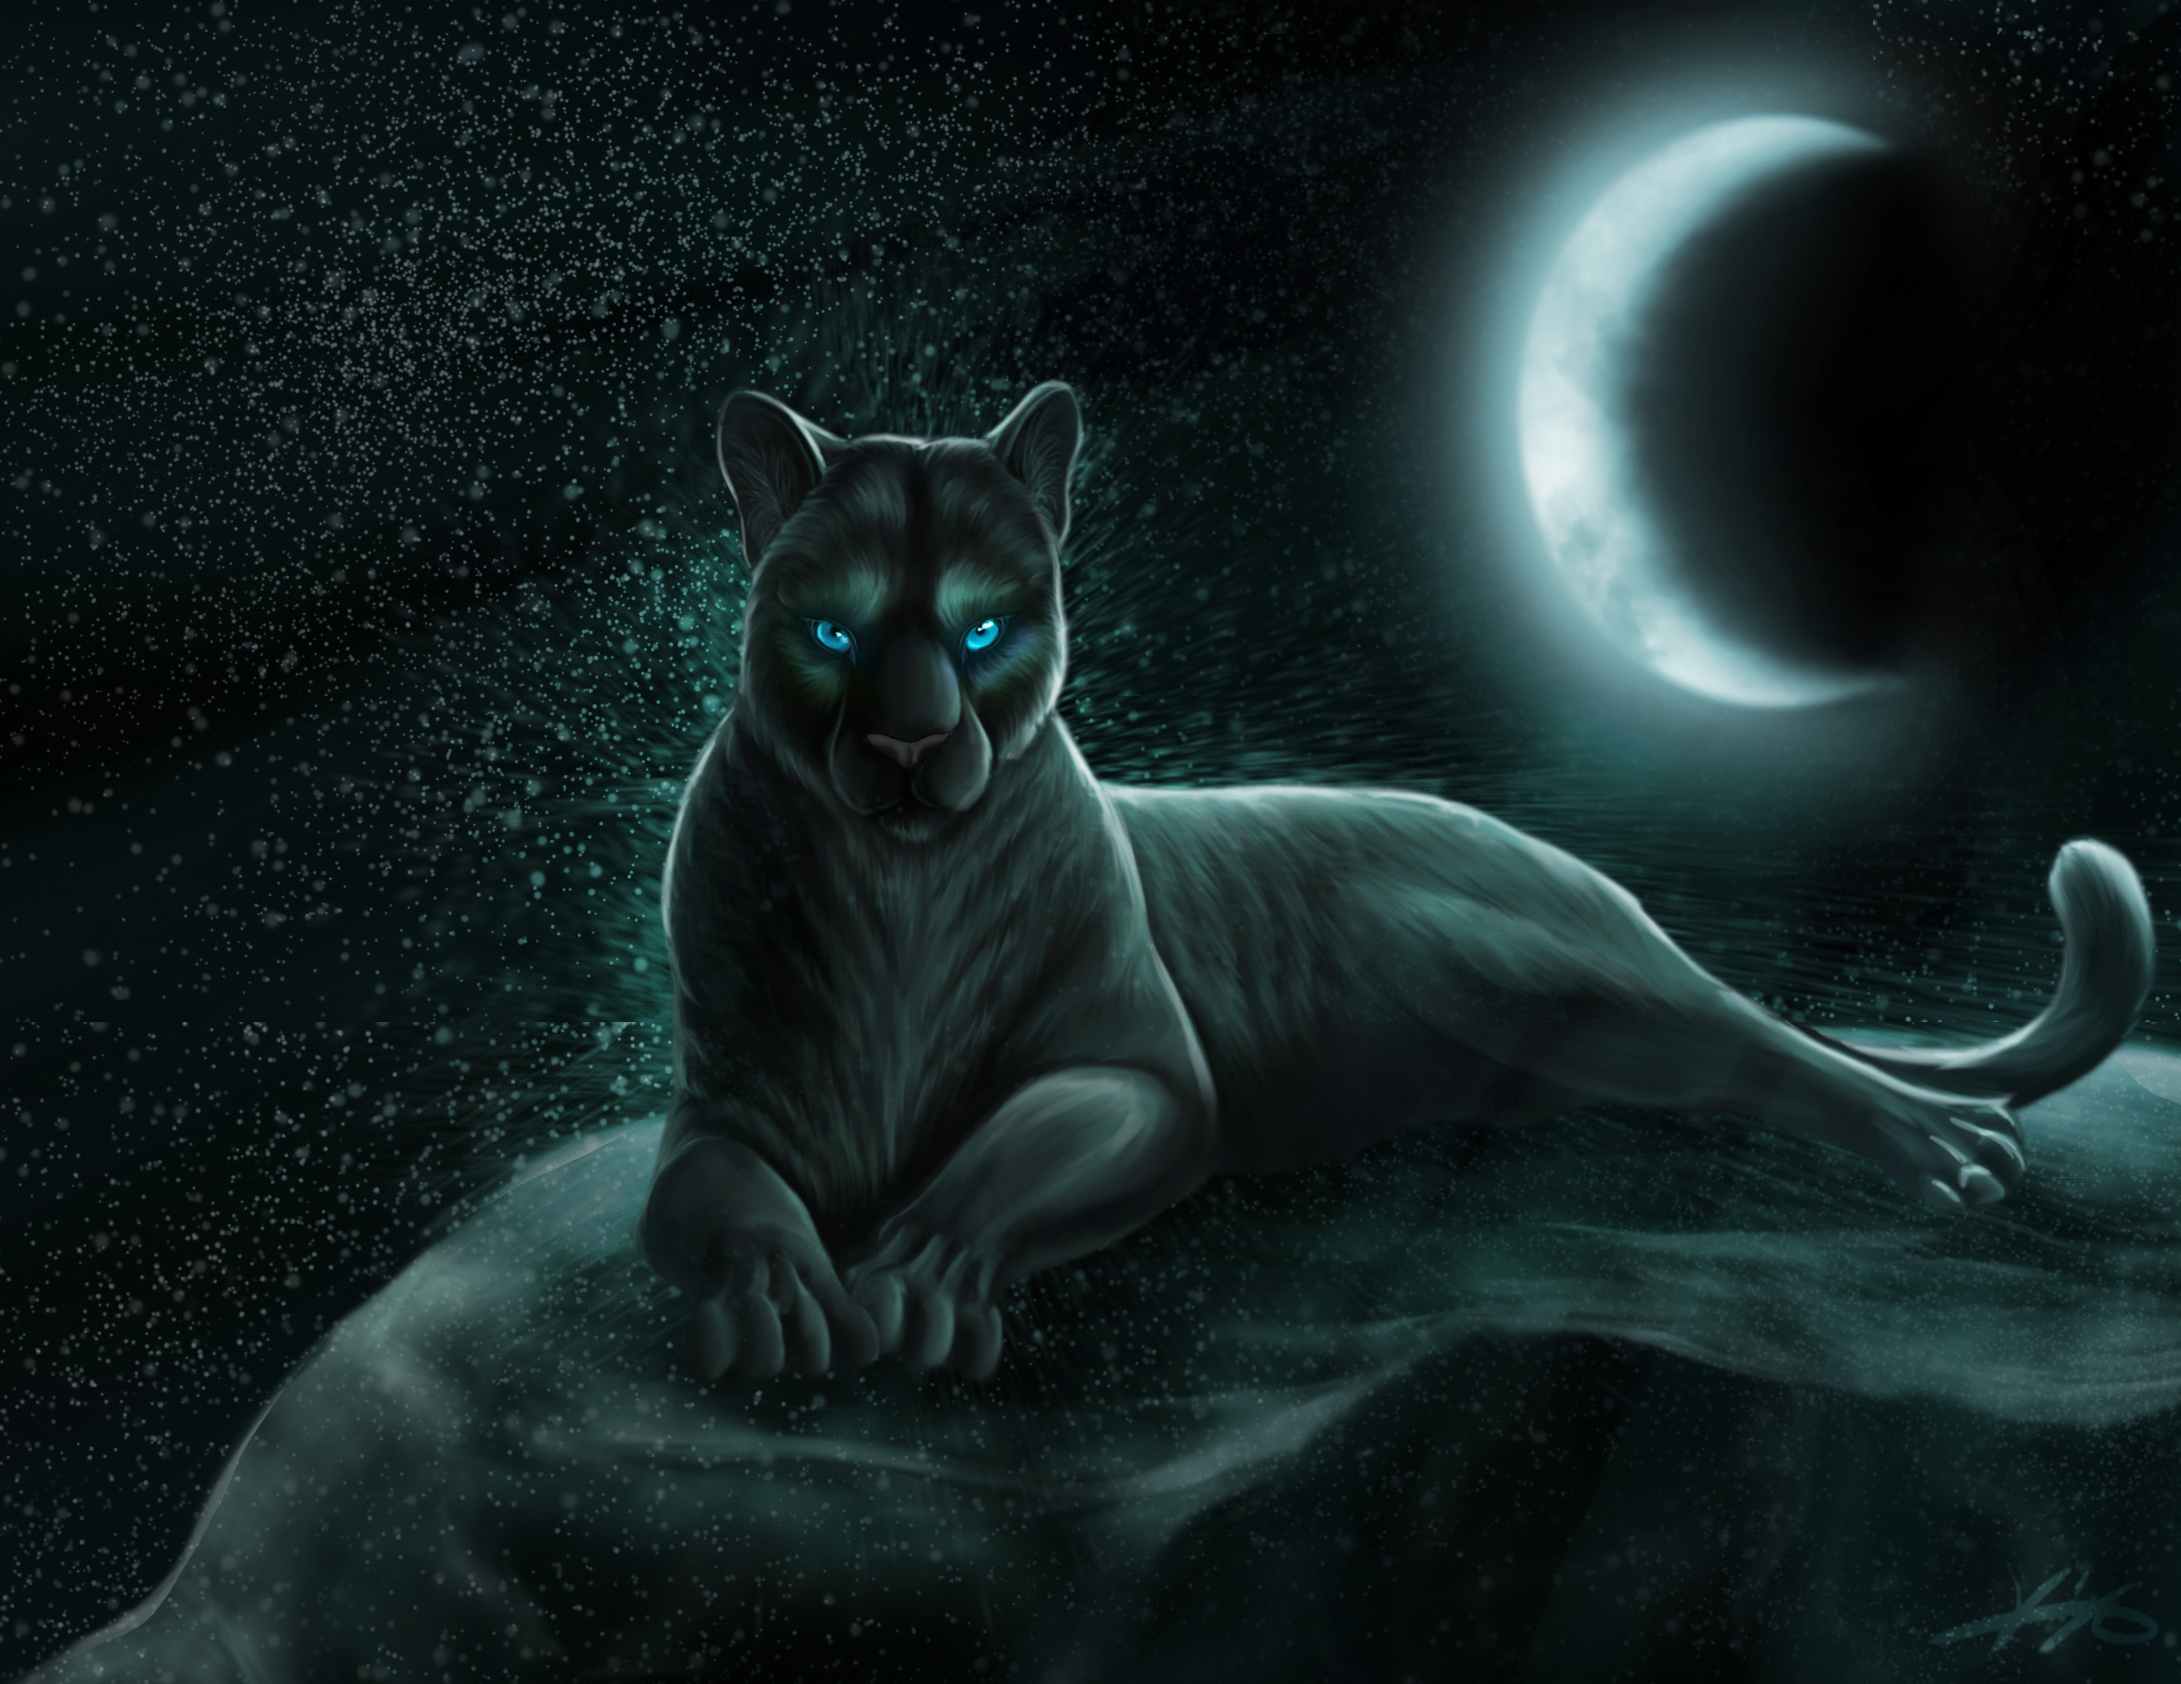 Black Panther in the Moonlight by Golphee